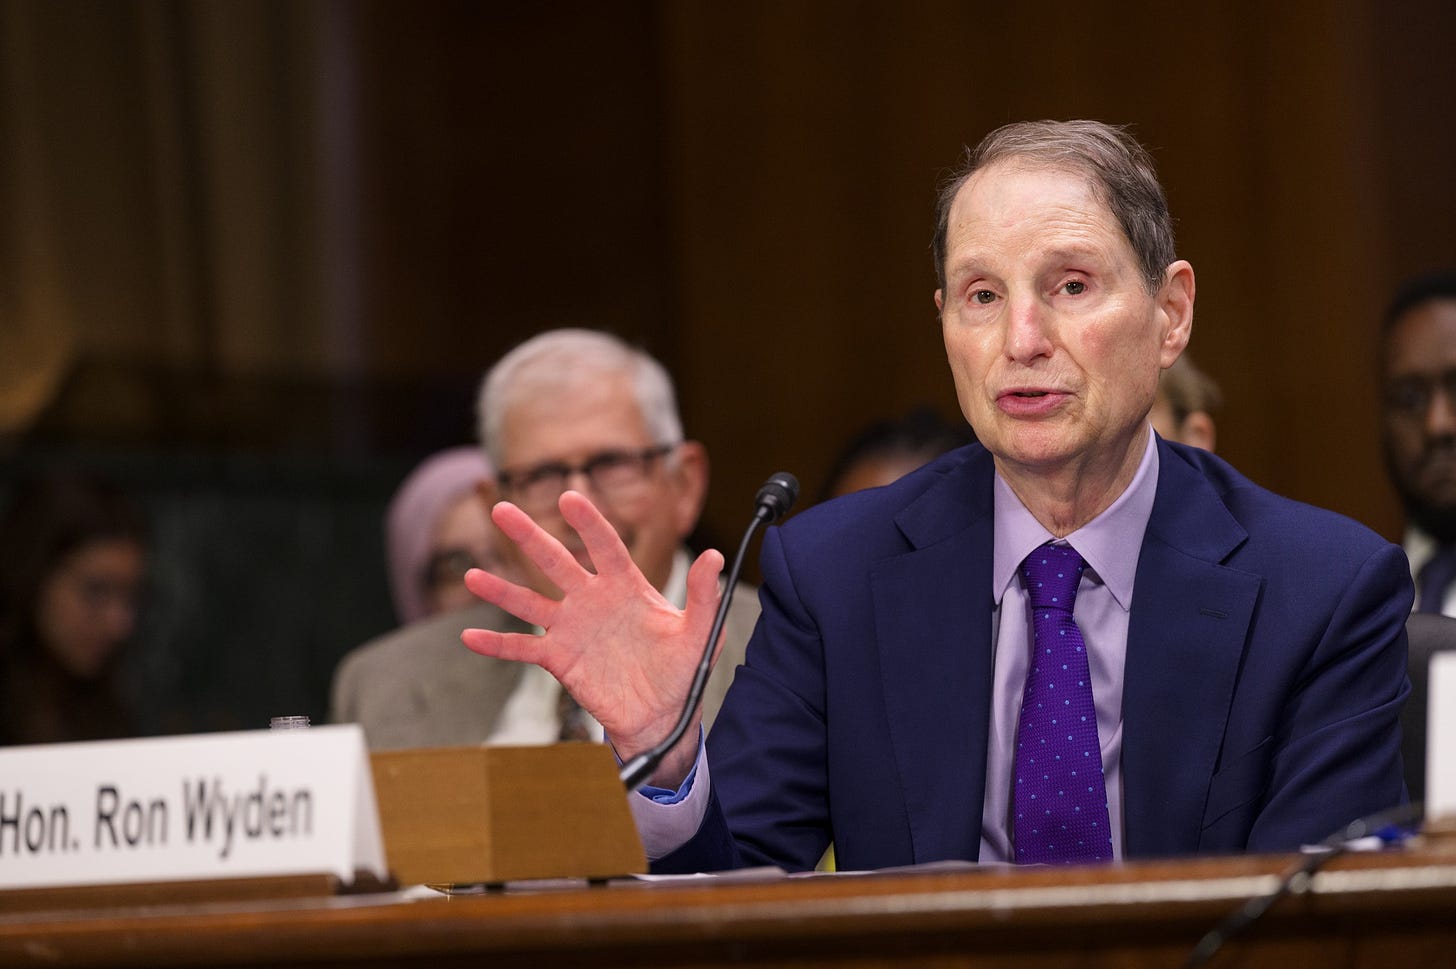 May be an image of 4 people and text that says 'Hon. Ron Wyden'